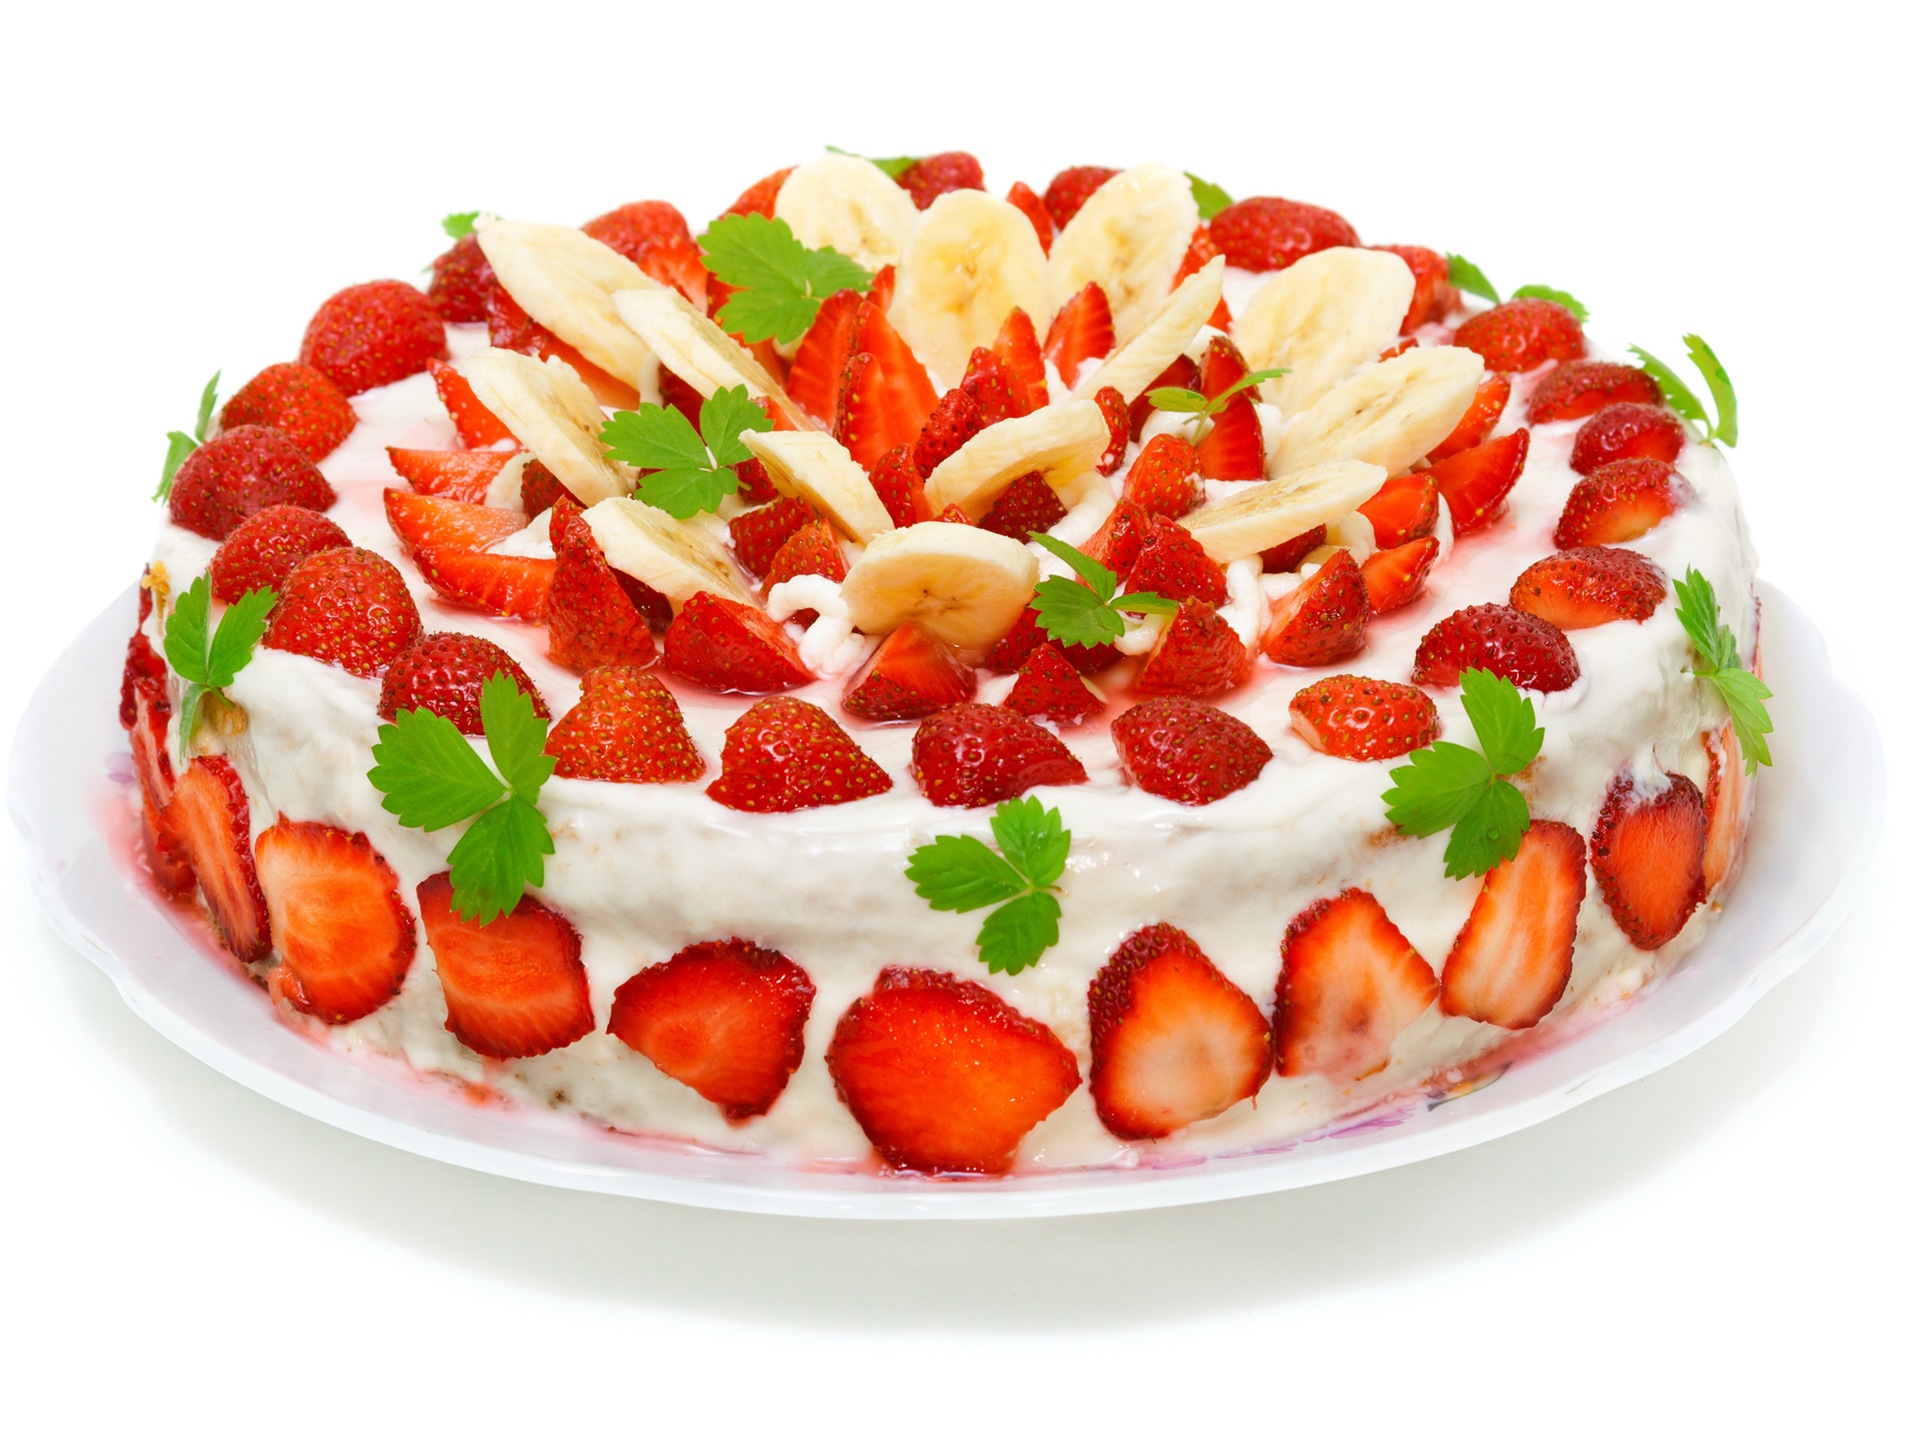 Delicious strawberry cake HD wallpapers #17 - 1920x1440